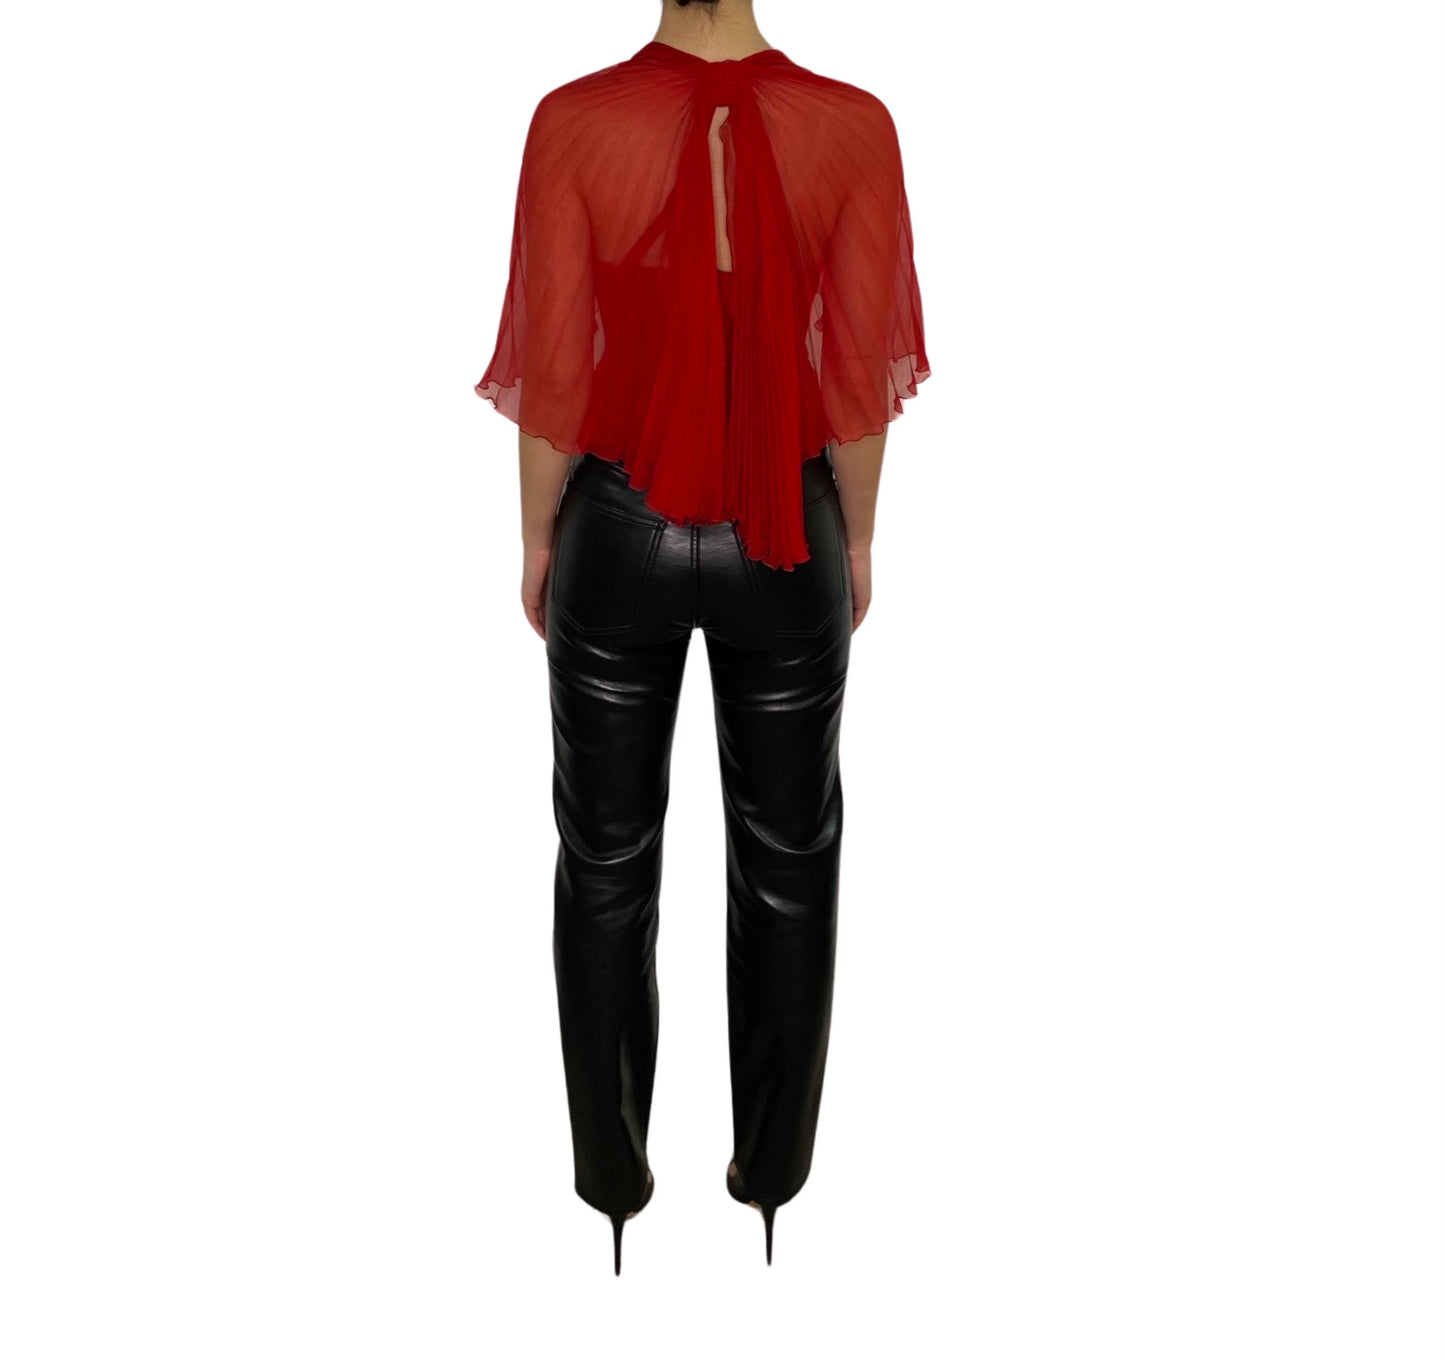 Jean Paul Gaultier Red Sleeveless Top with Cloth Shoulder Overlay